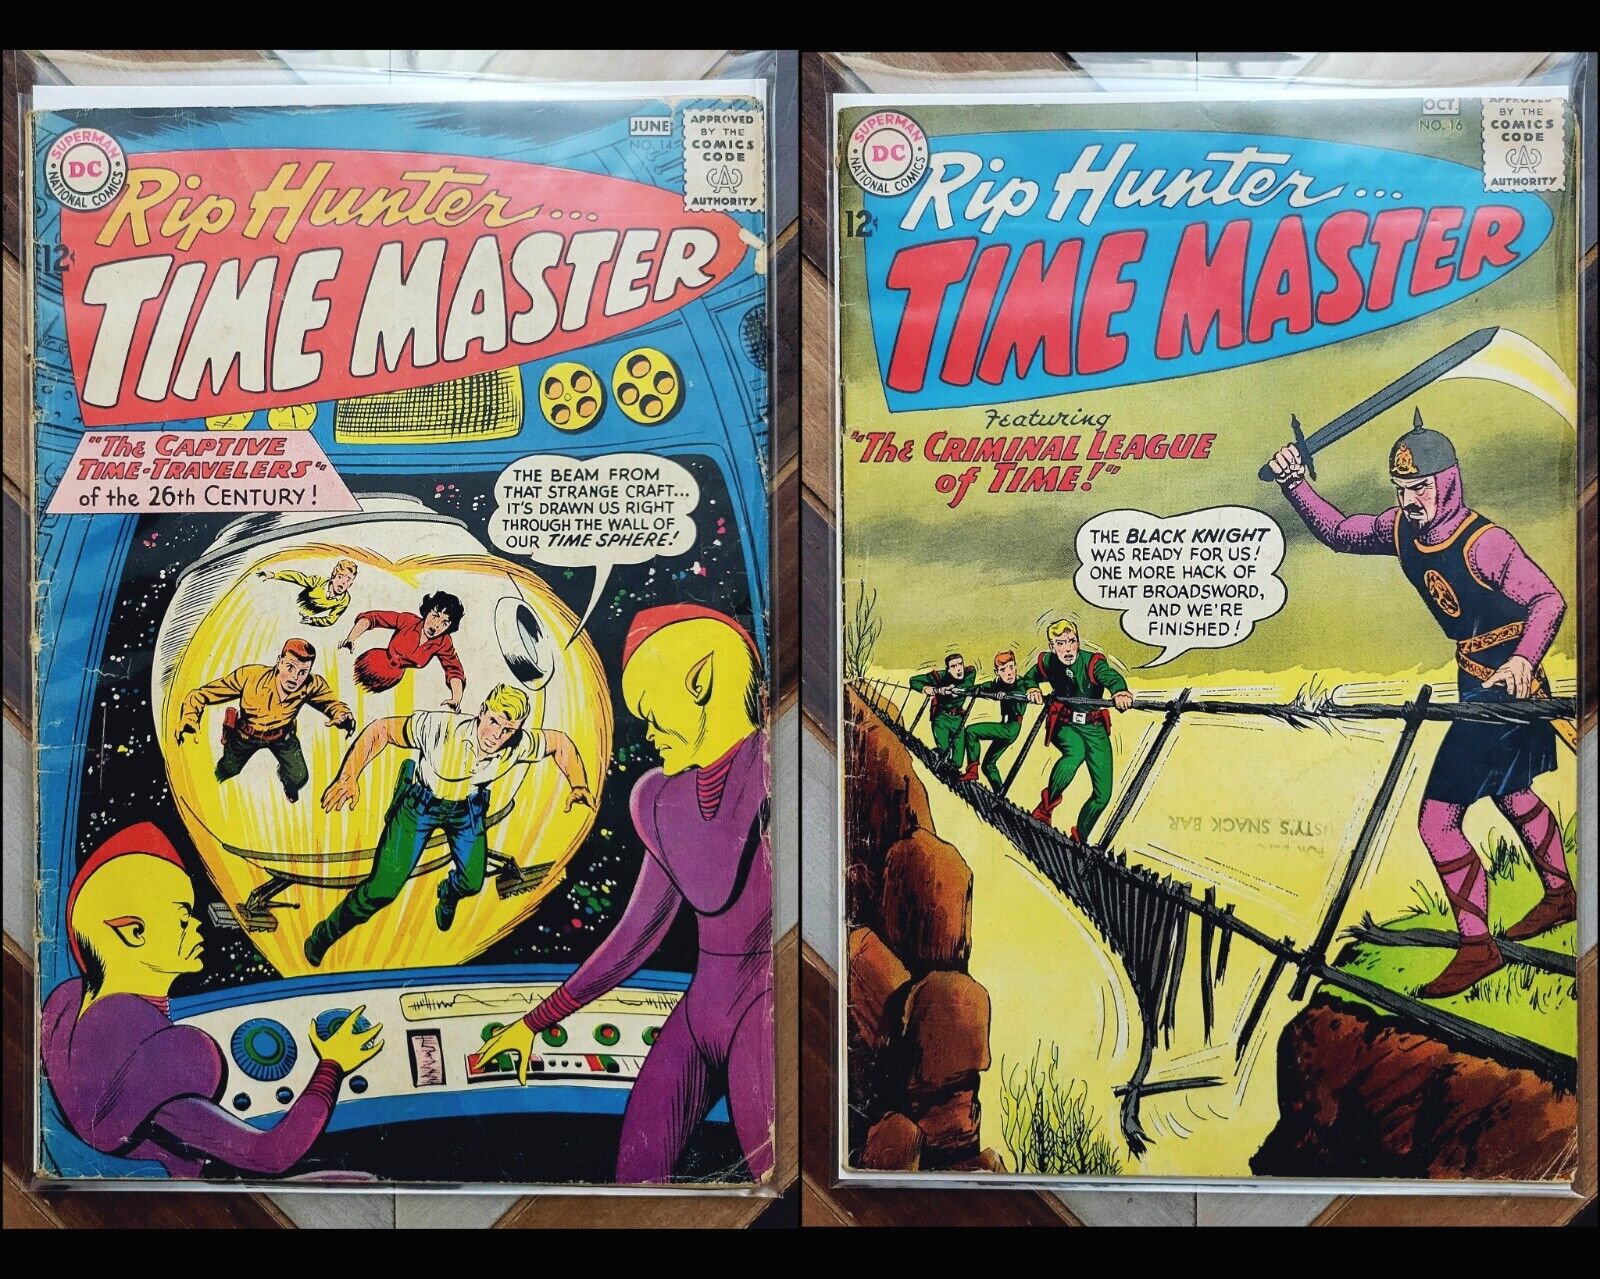 RIP HUNTER Time Master #14 & 16 (DC 1963) Silver Age Jack Miller Bill Ely Covers